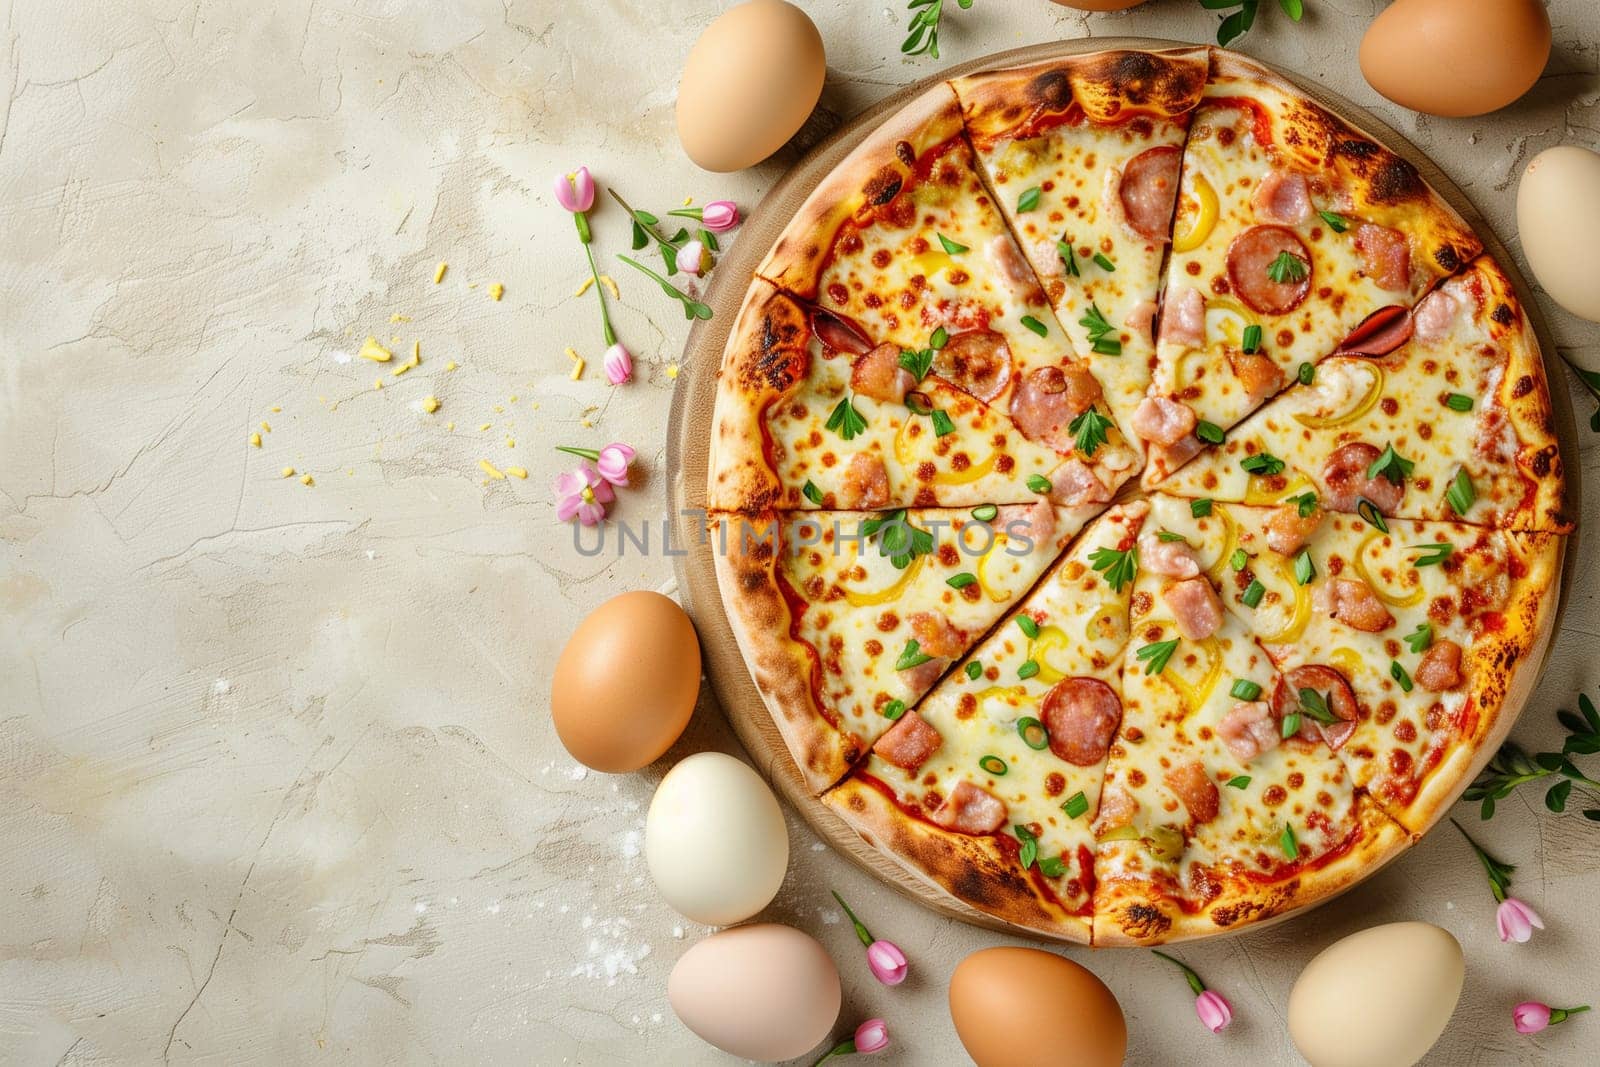 Pizza on Table Surrounded by Eggs by Sd28DimoN_1976